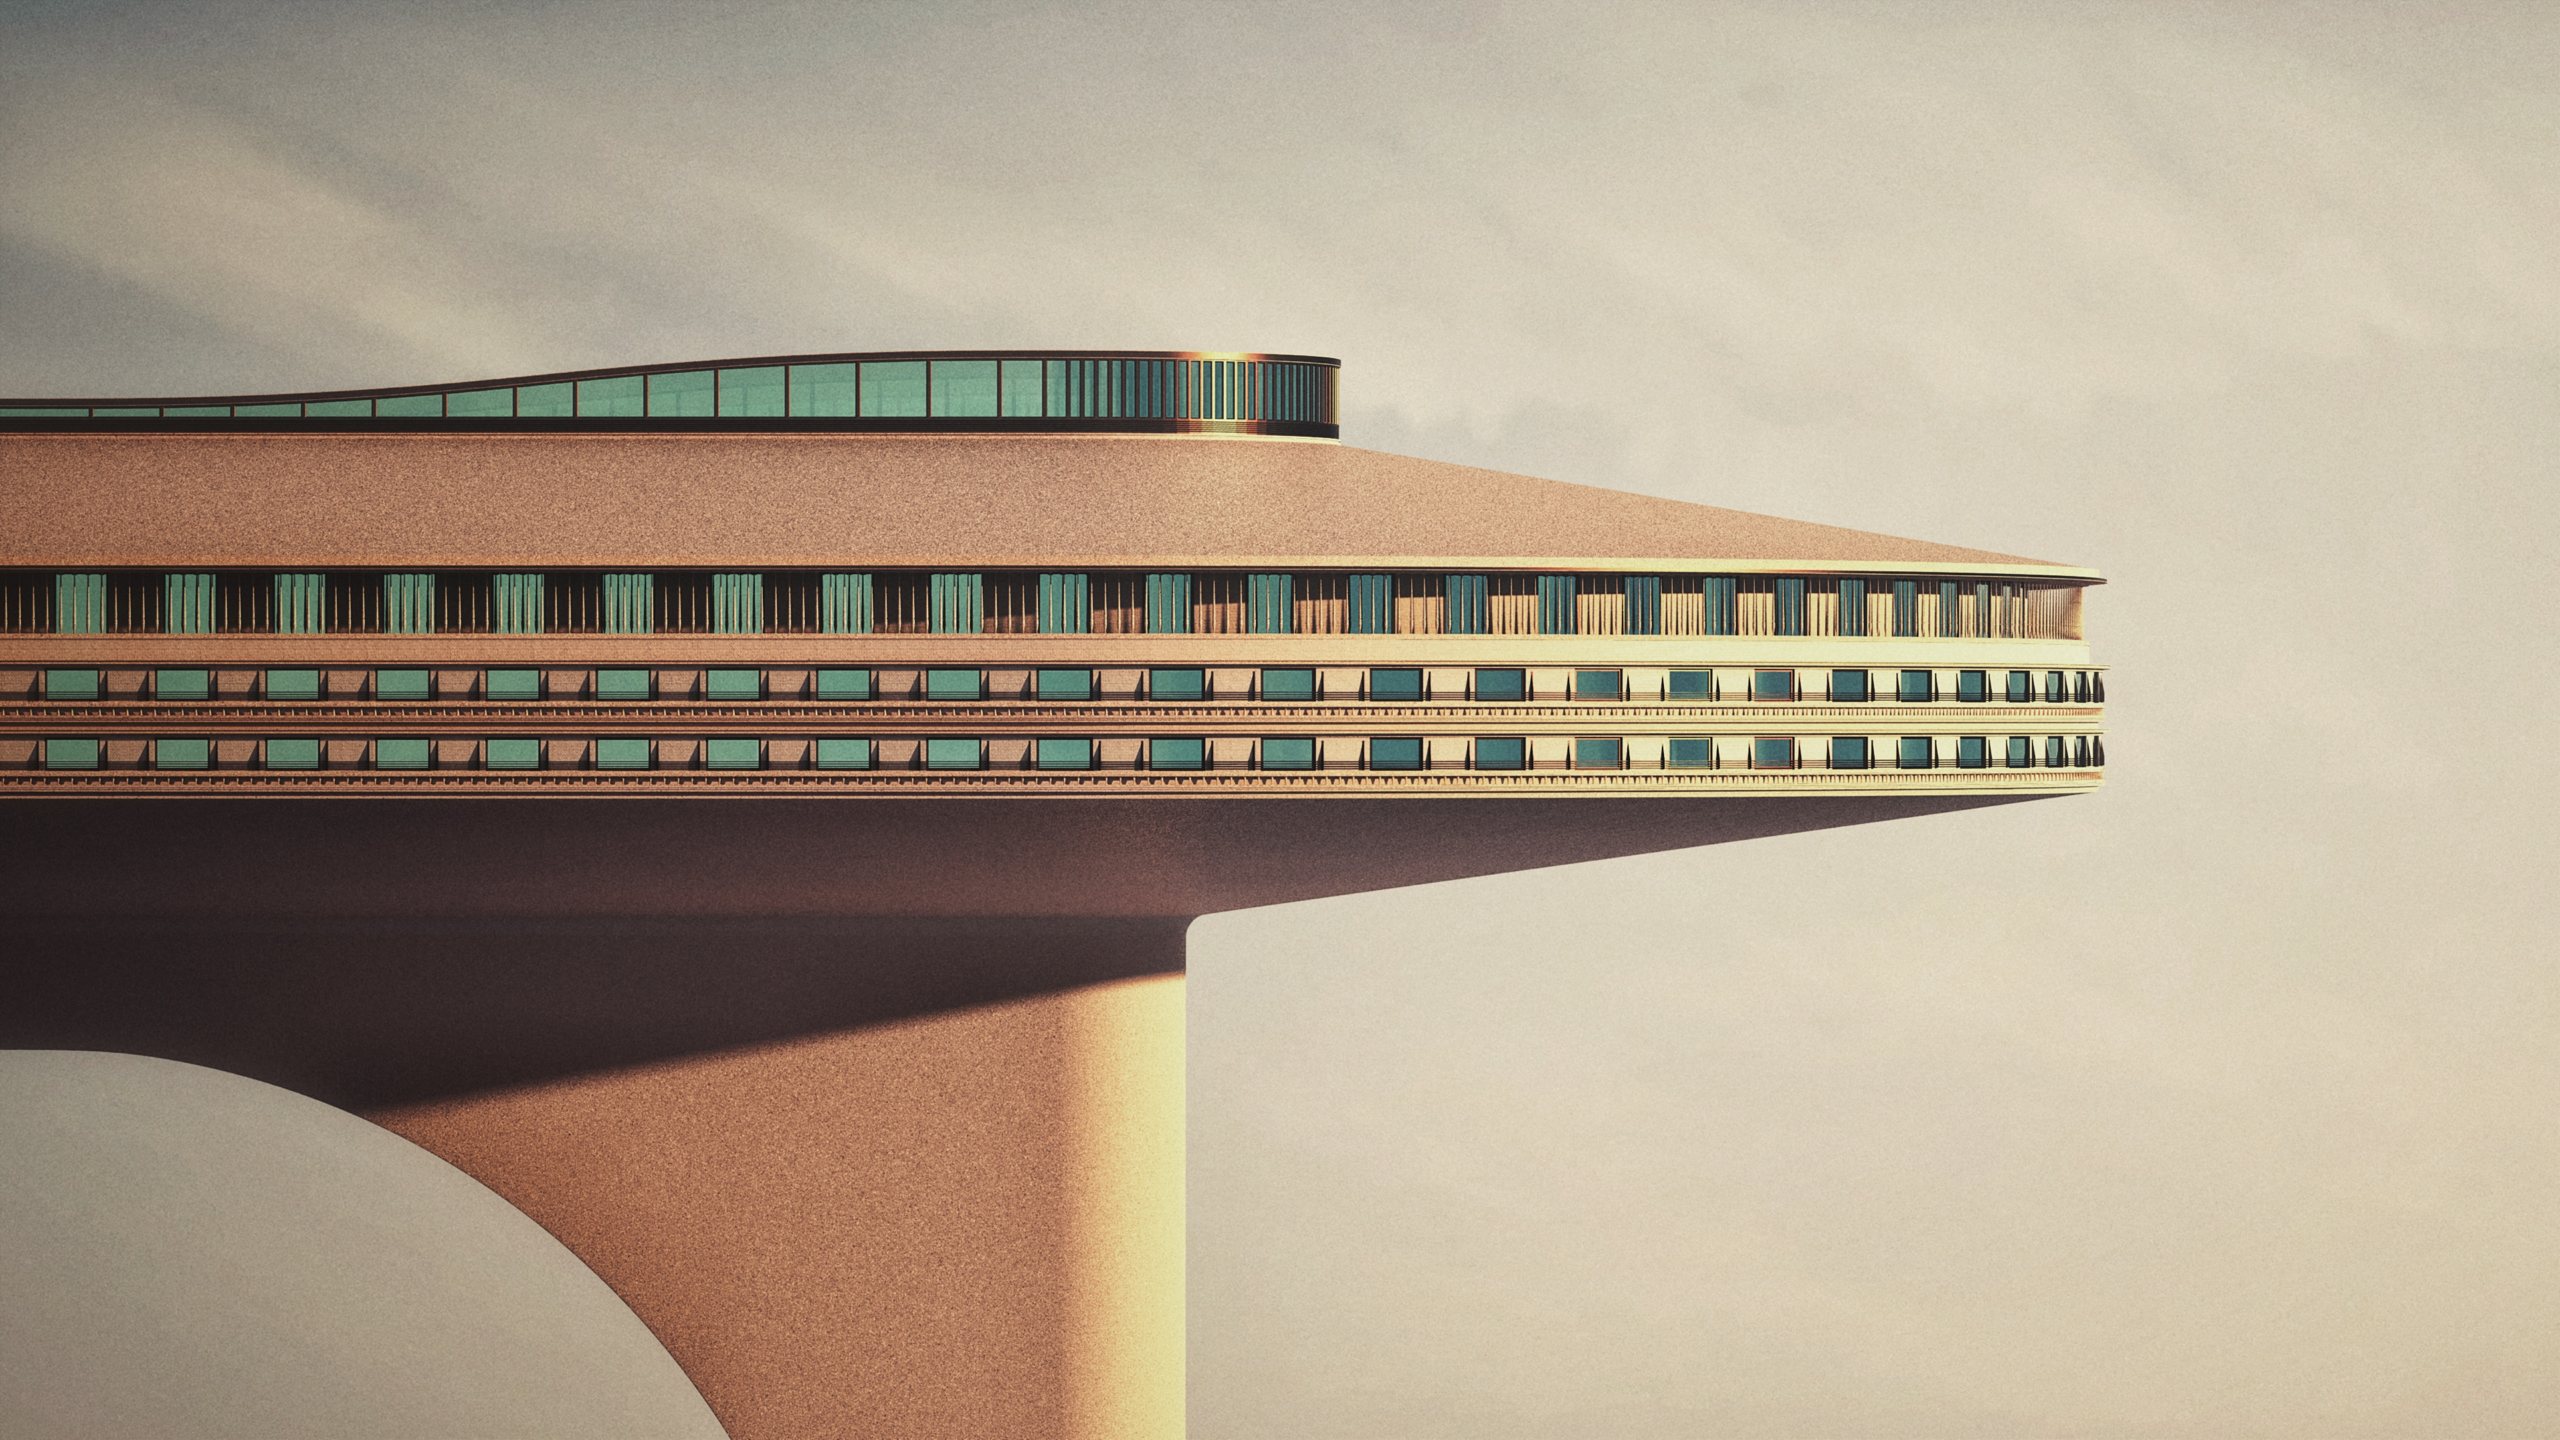 3D rendering of surreal architecture